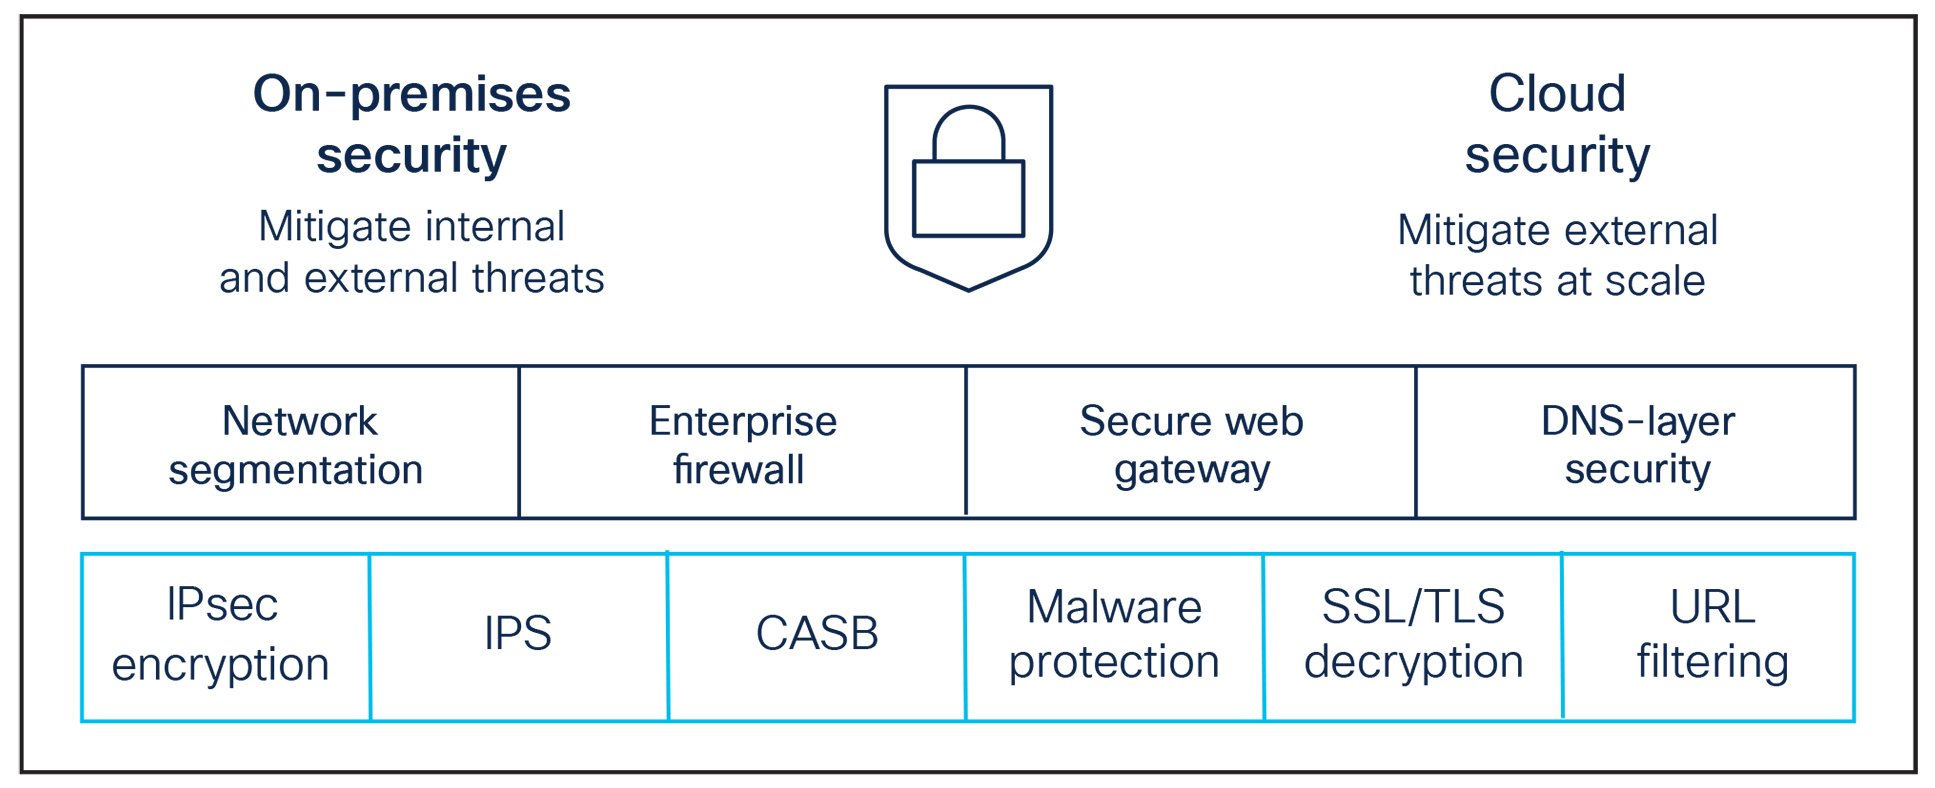 SD-WAN security features